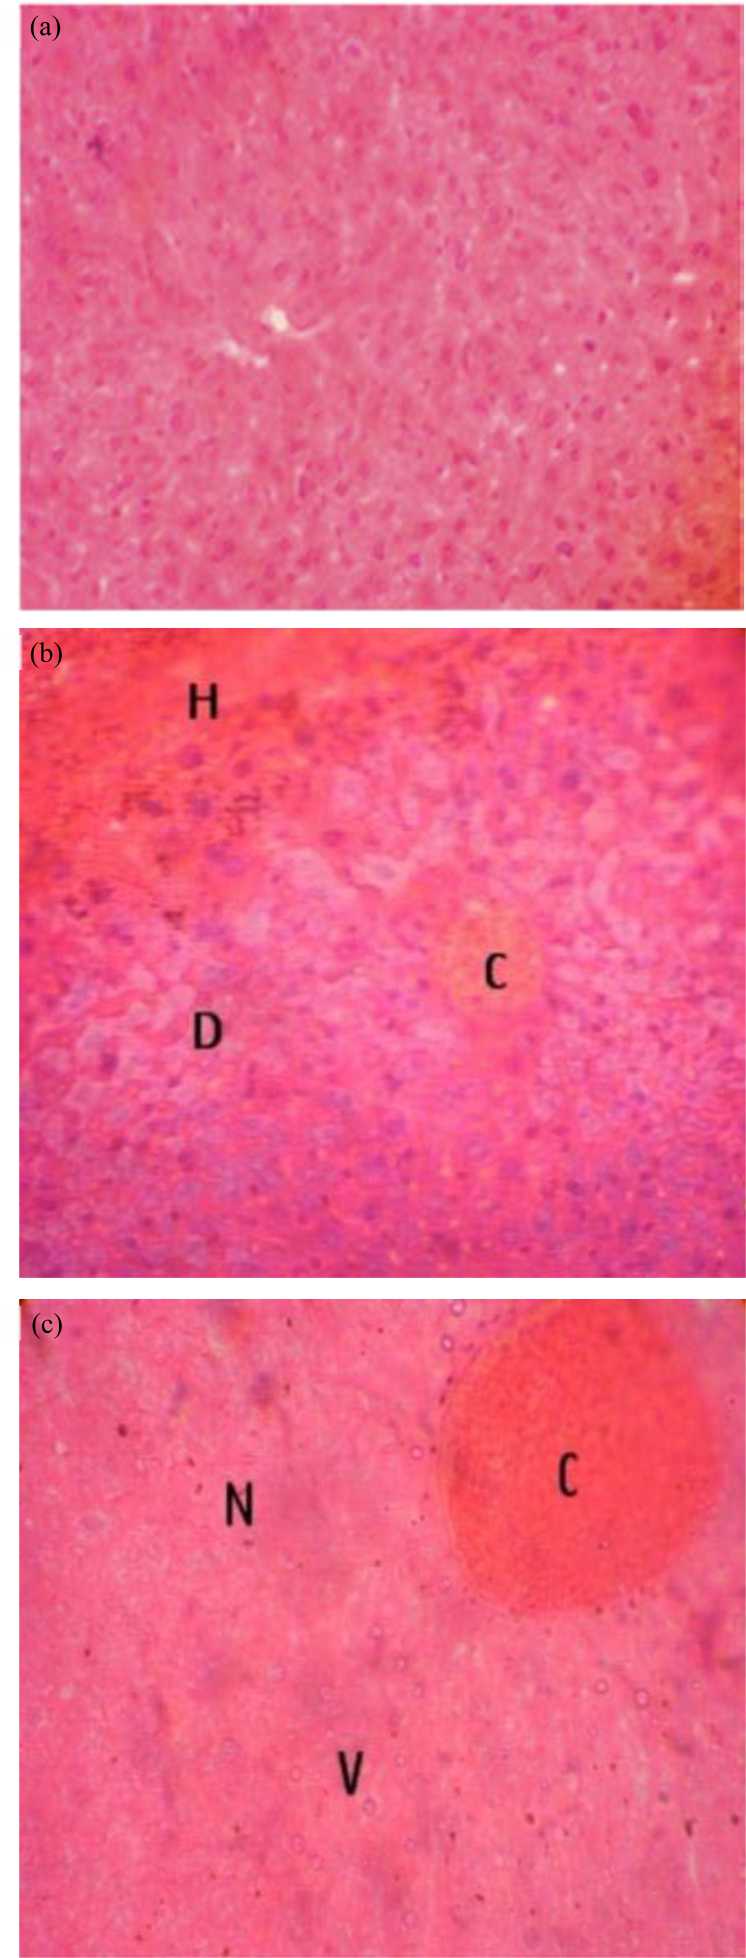 Image for - Toxicological Evaluation and Therapeutic Index of Ethanolic Leaf Extract of Acanthus montanus (Acanthaceae) in Mice